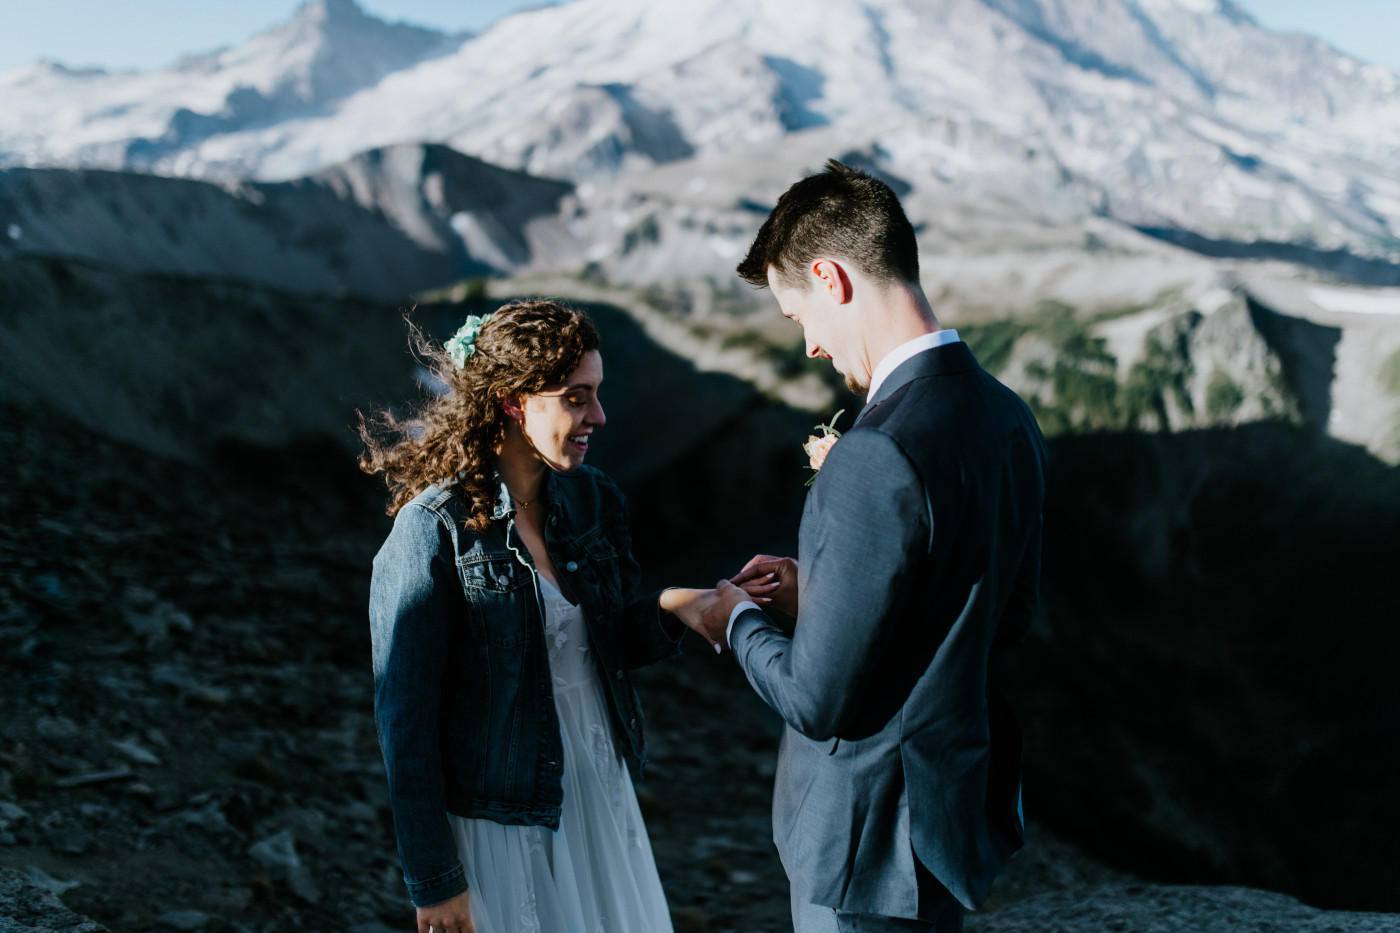 Tasha and Chad exchange rings. Elopement photography at Mount Rainier by Sienna Plus Josh.